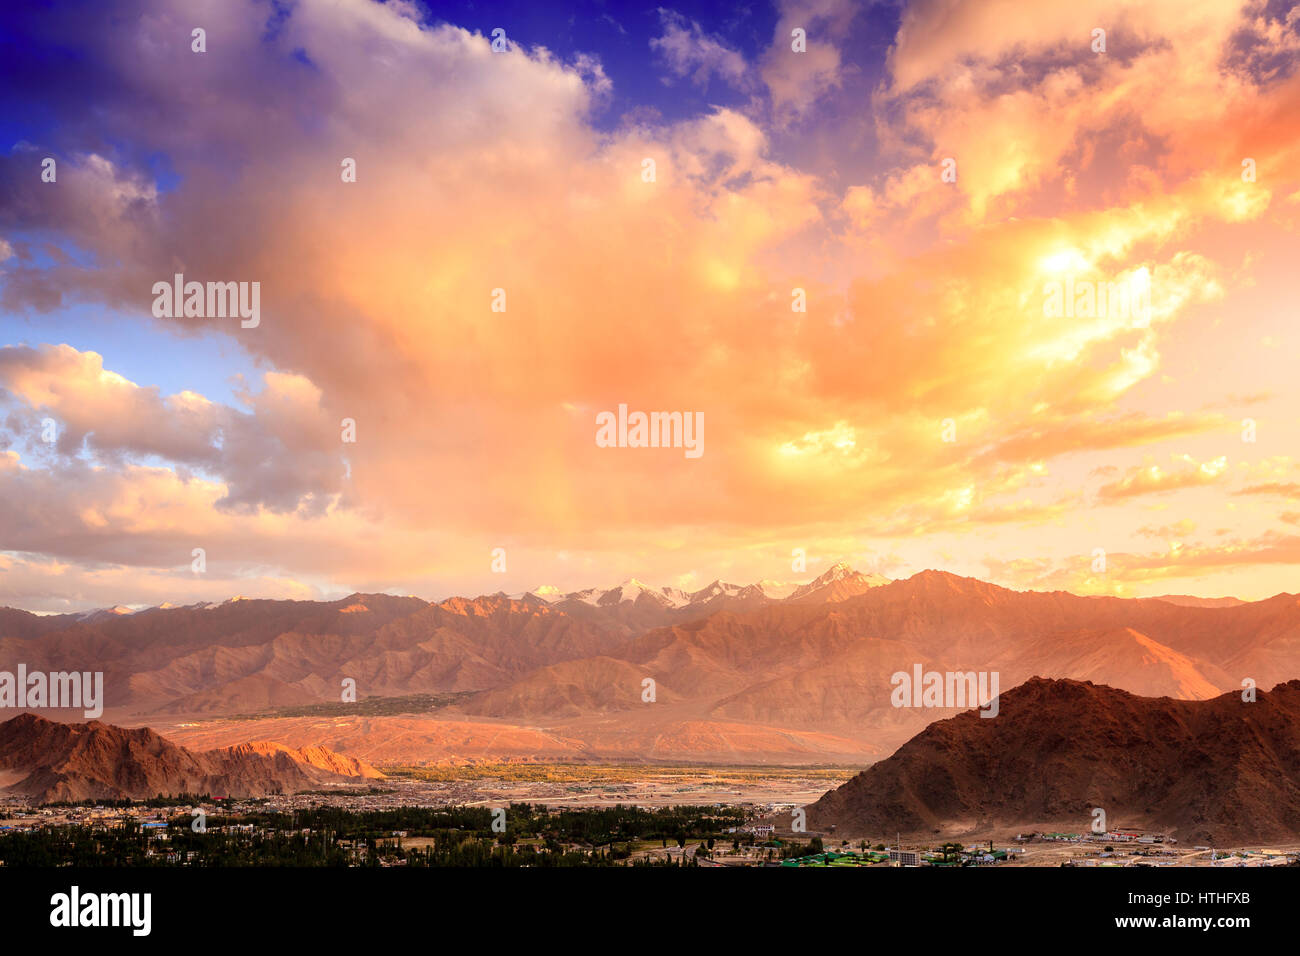 Bird's eye view of city of Leh in Ladakh, Kashmir and surrounding mountains Stock Photo